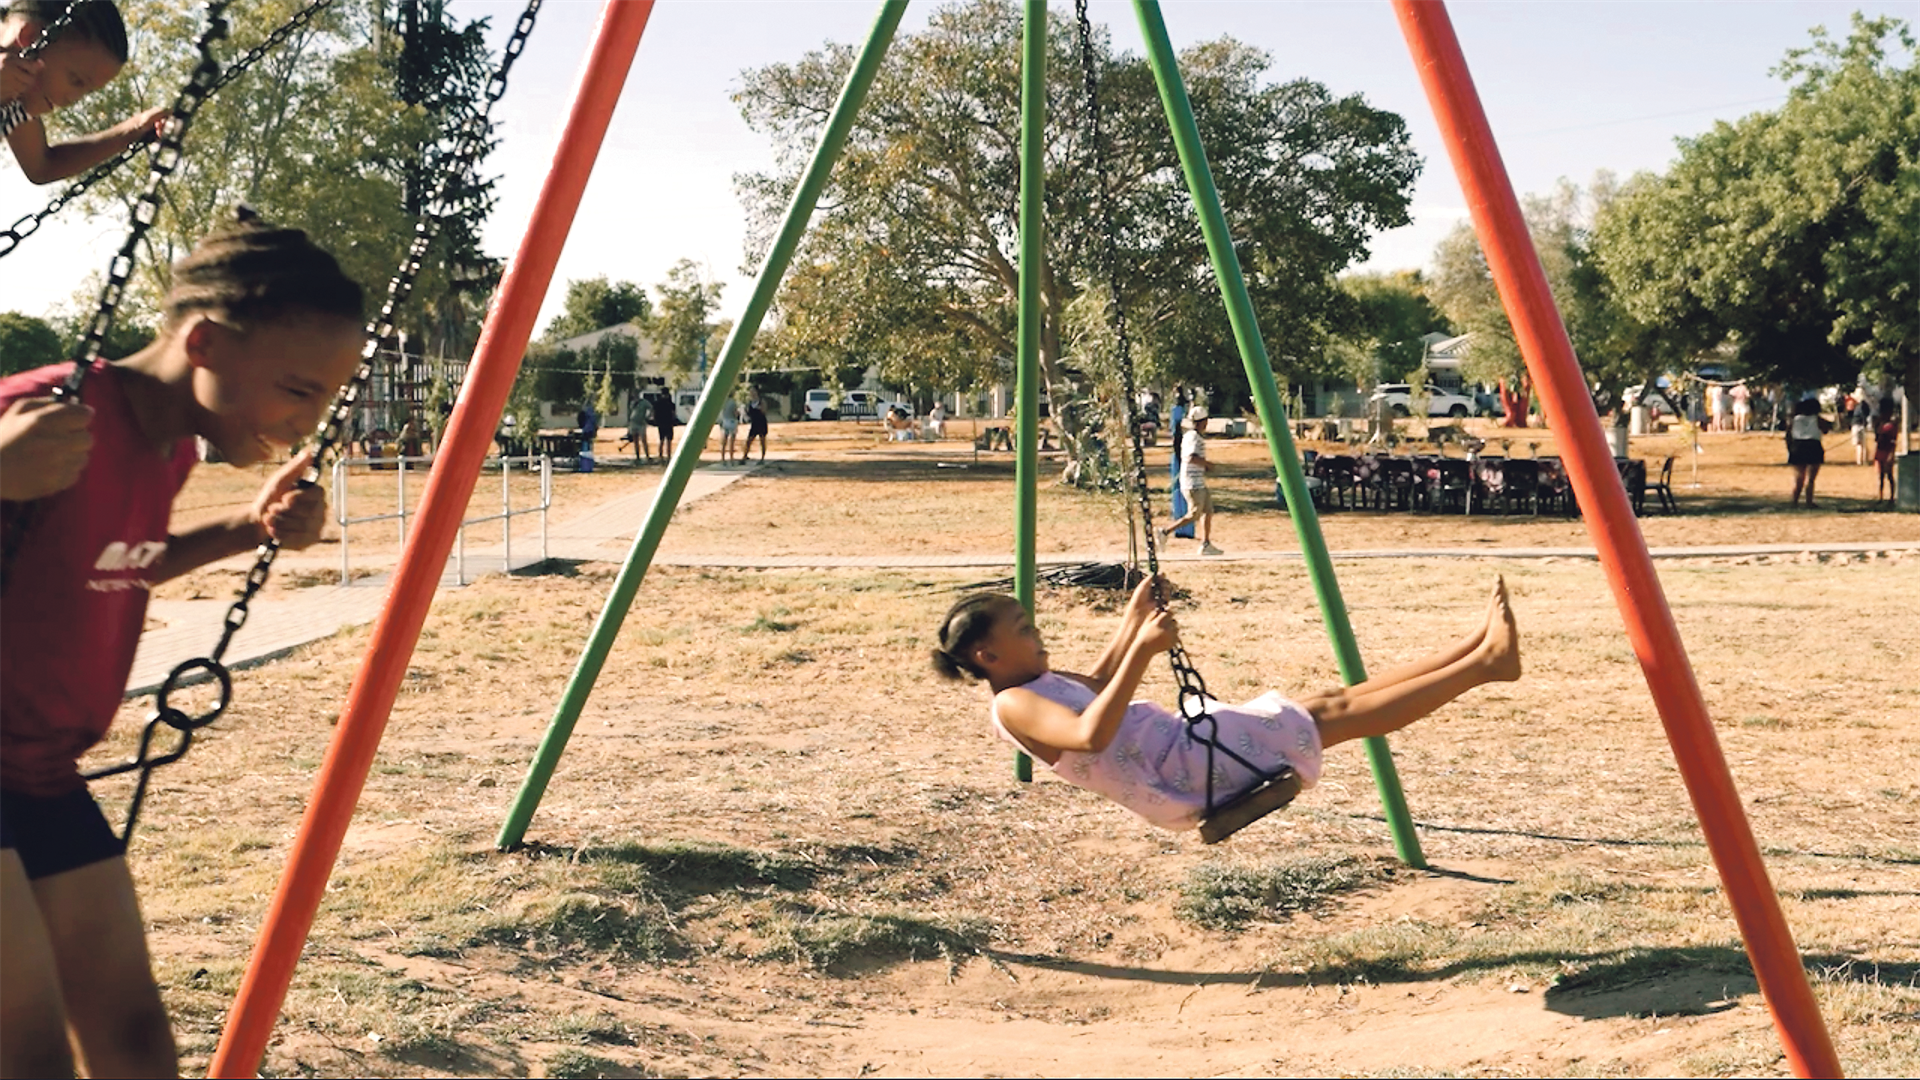 Children of Citrusdal can now enjoy themselves in the revamped Truter Memorial Park